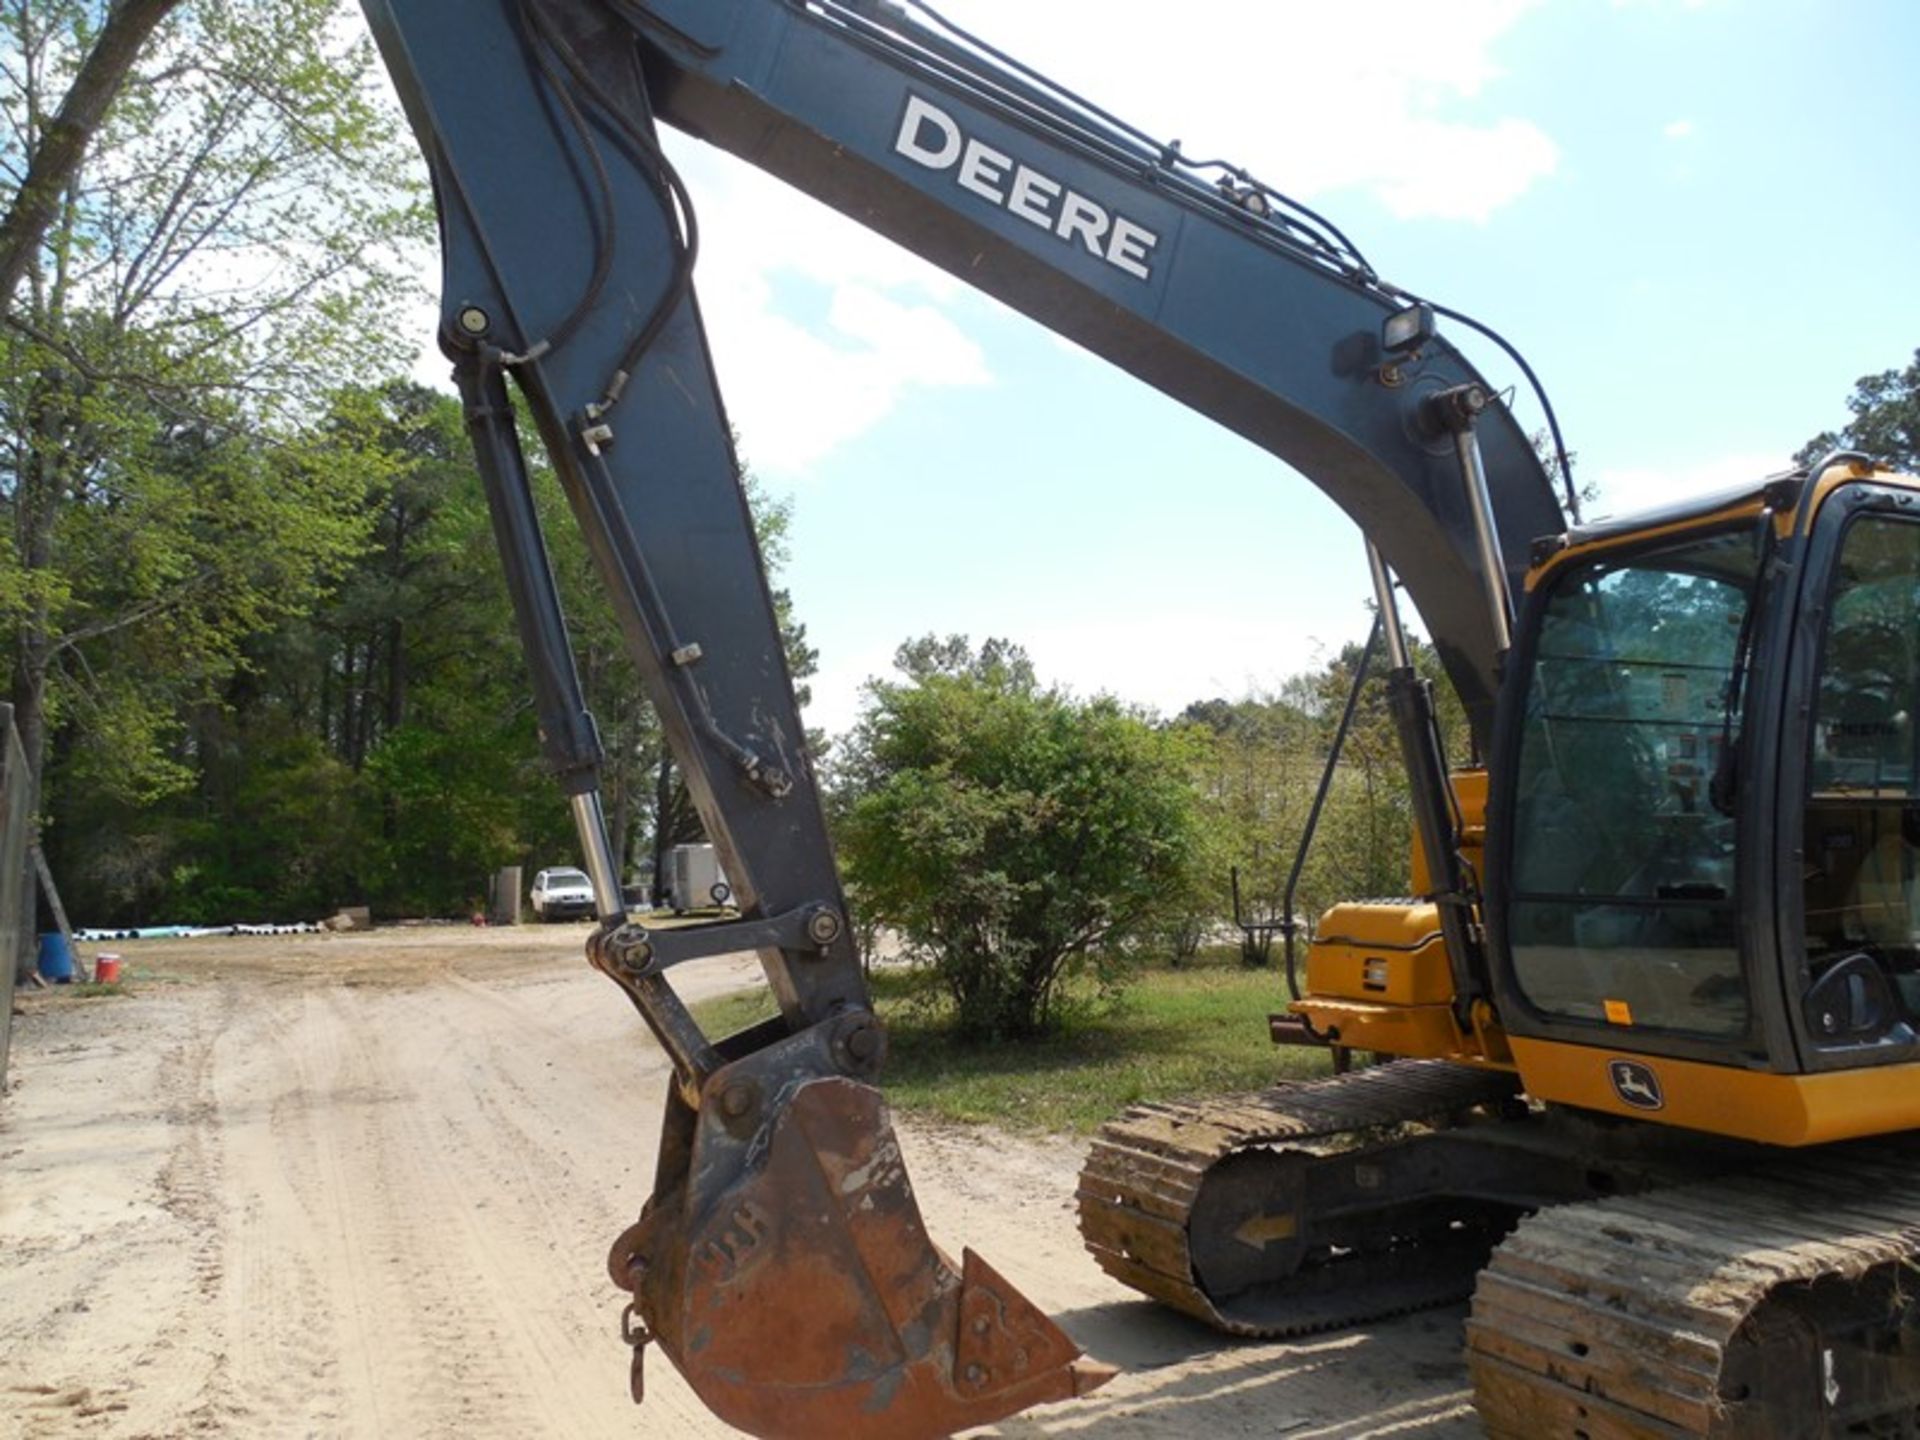 2015 Deere 130G Excavator 2191 hrs Cab / AC Long Arm, 28" Pads, 24" Bucket, Control Pattern Select - Image 2 of 9